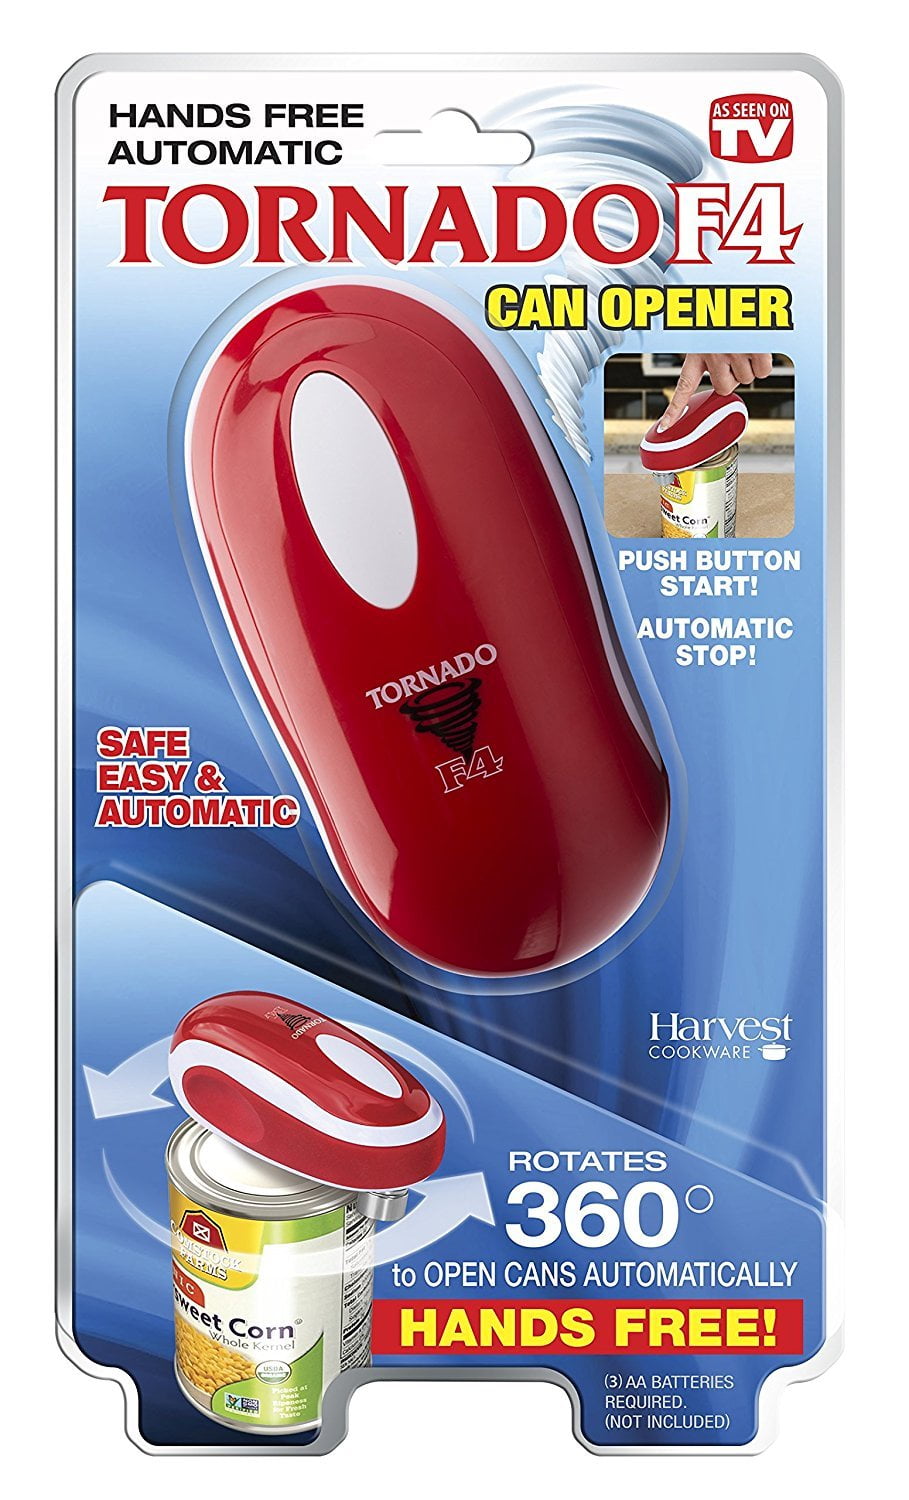 Emergency can opener! : r/funny